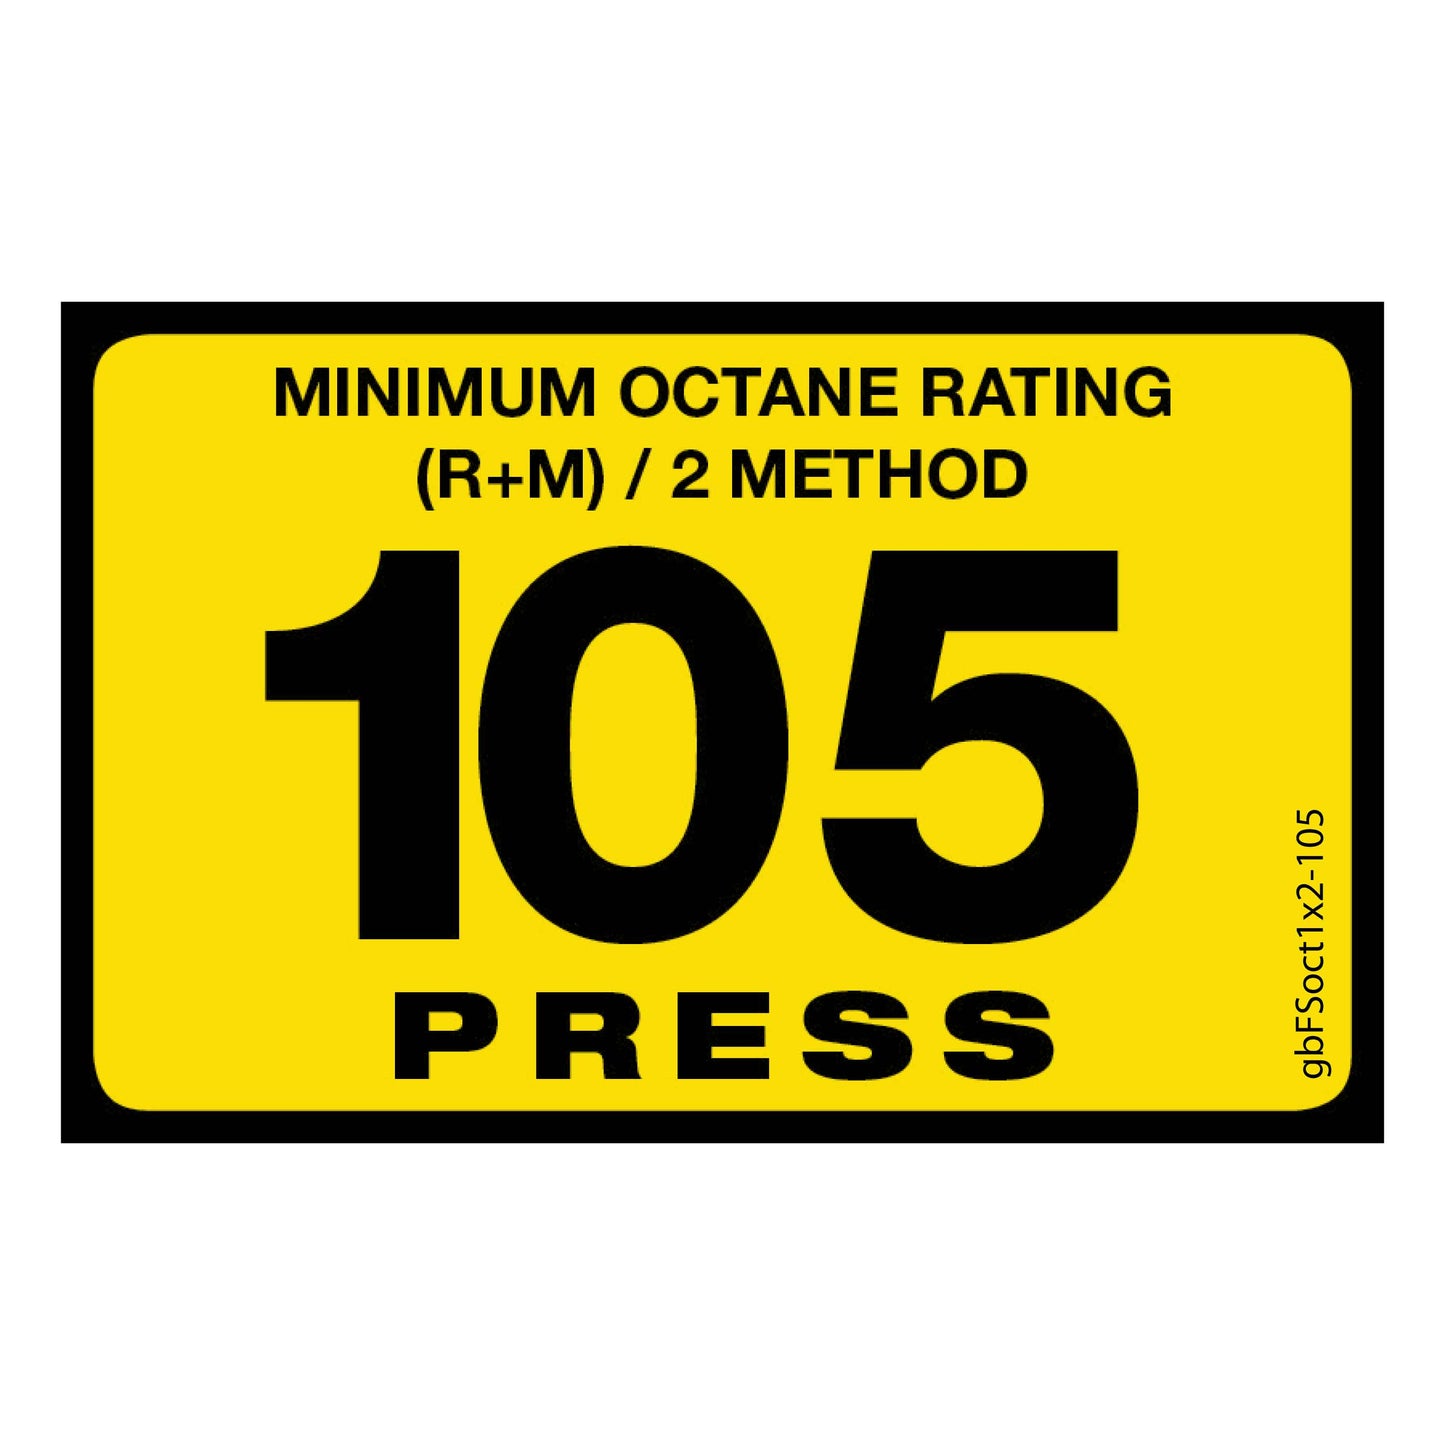 104 Press Octane Rating Decal. 1 inch by 2 inches in size. 